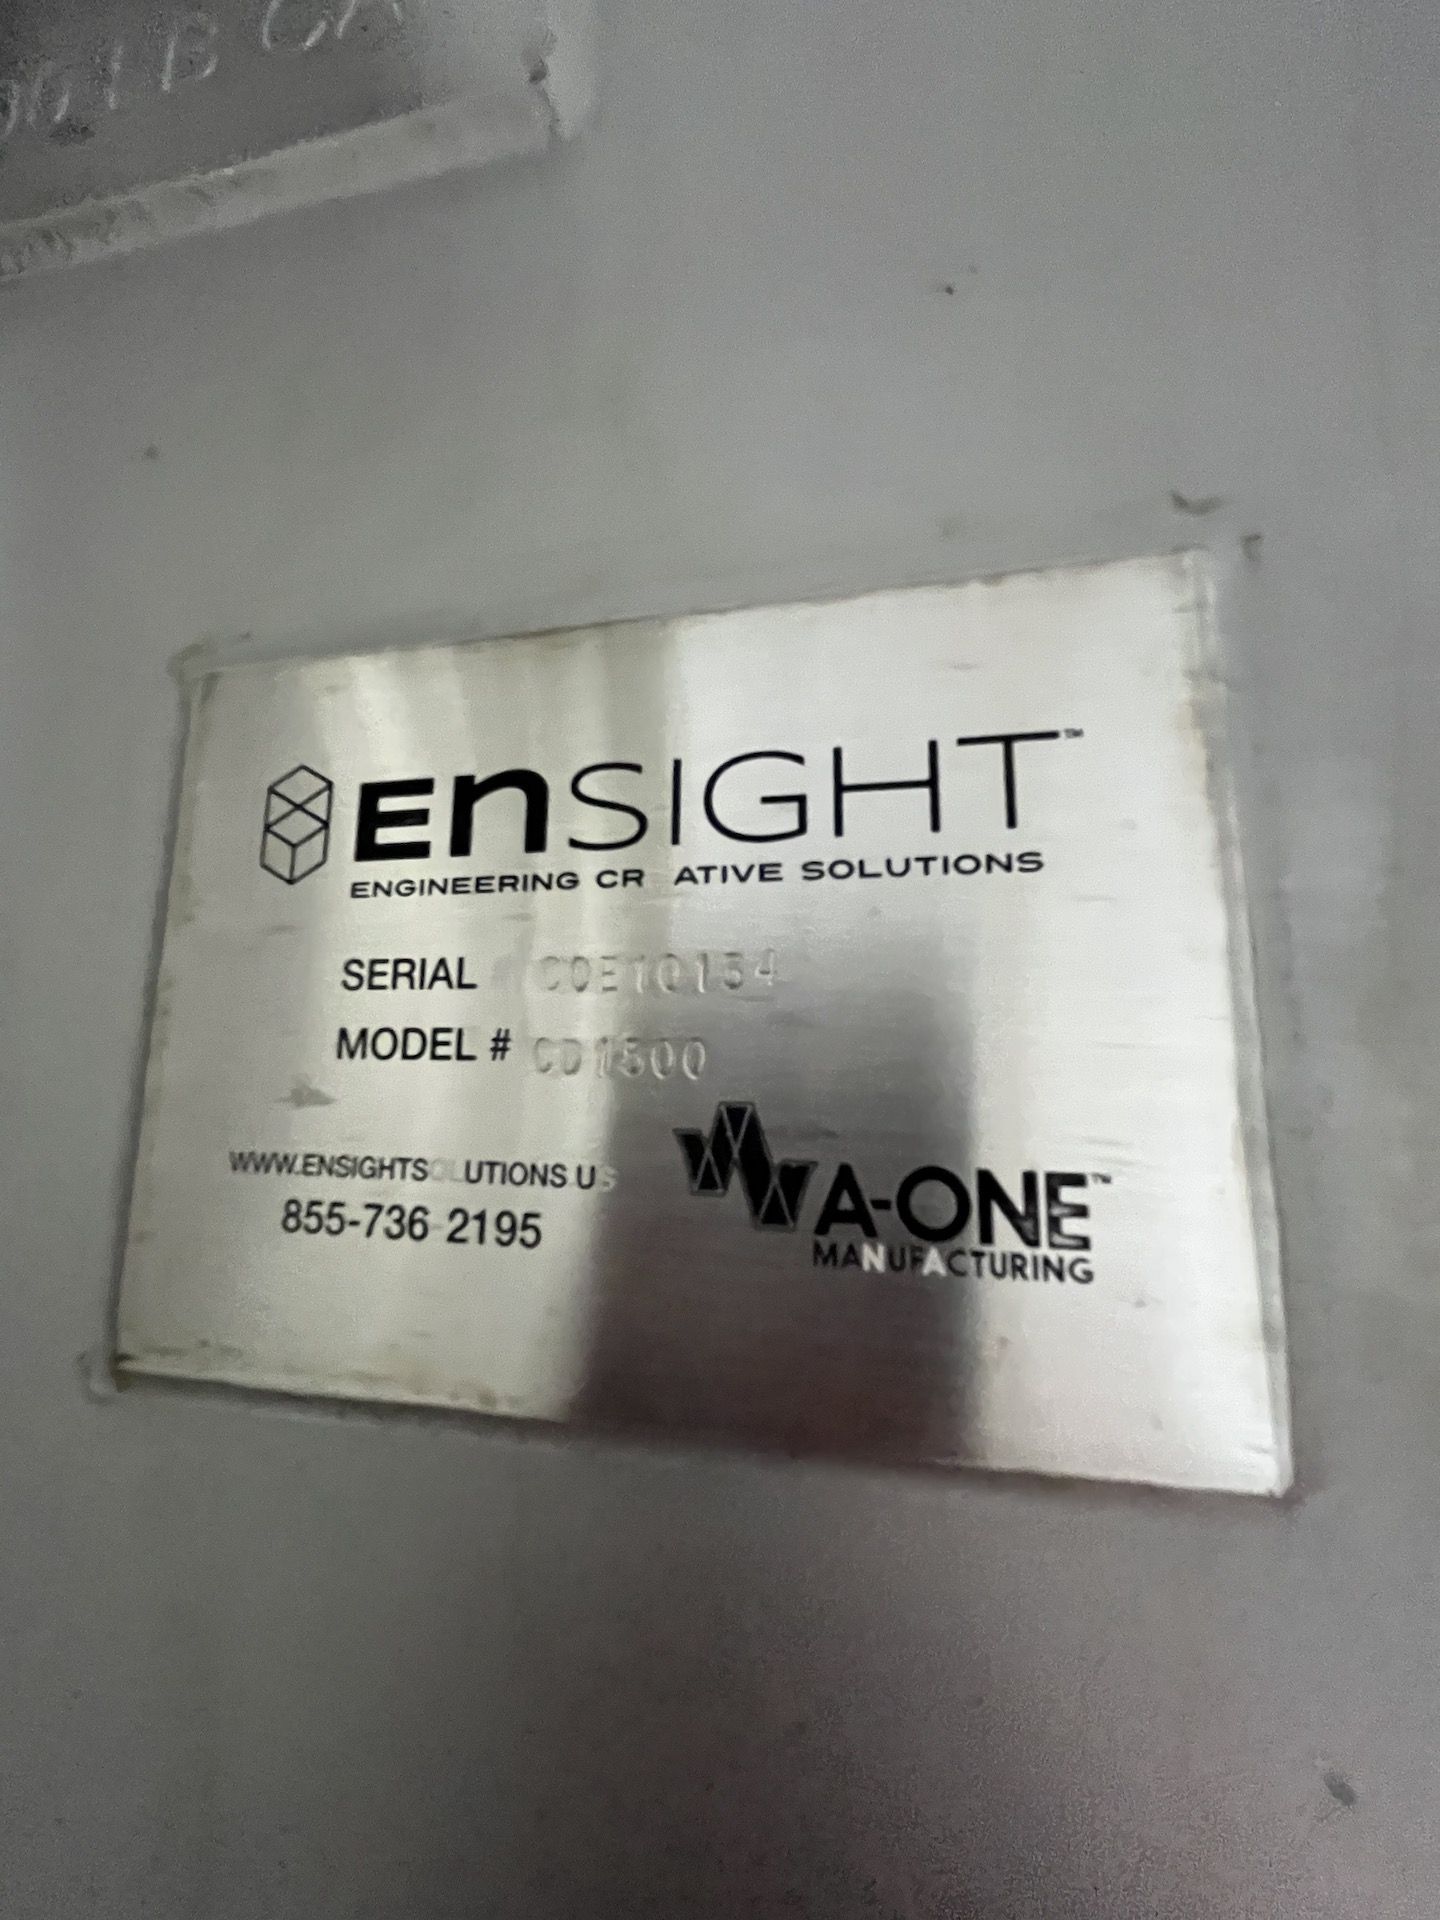 A-ONE MFG ENSIGHT 1,500 LB CPACAITY COLUMN LIFT, MODEL CD1500, S/N COE10134, NEVER USED - Image 23 of 25